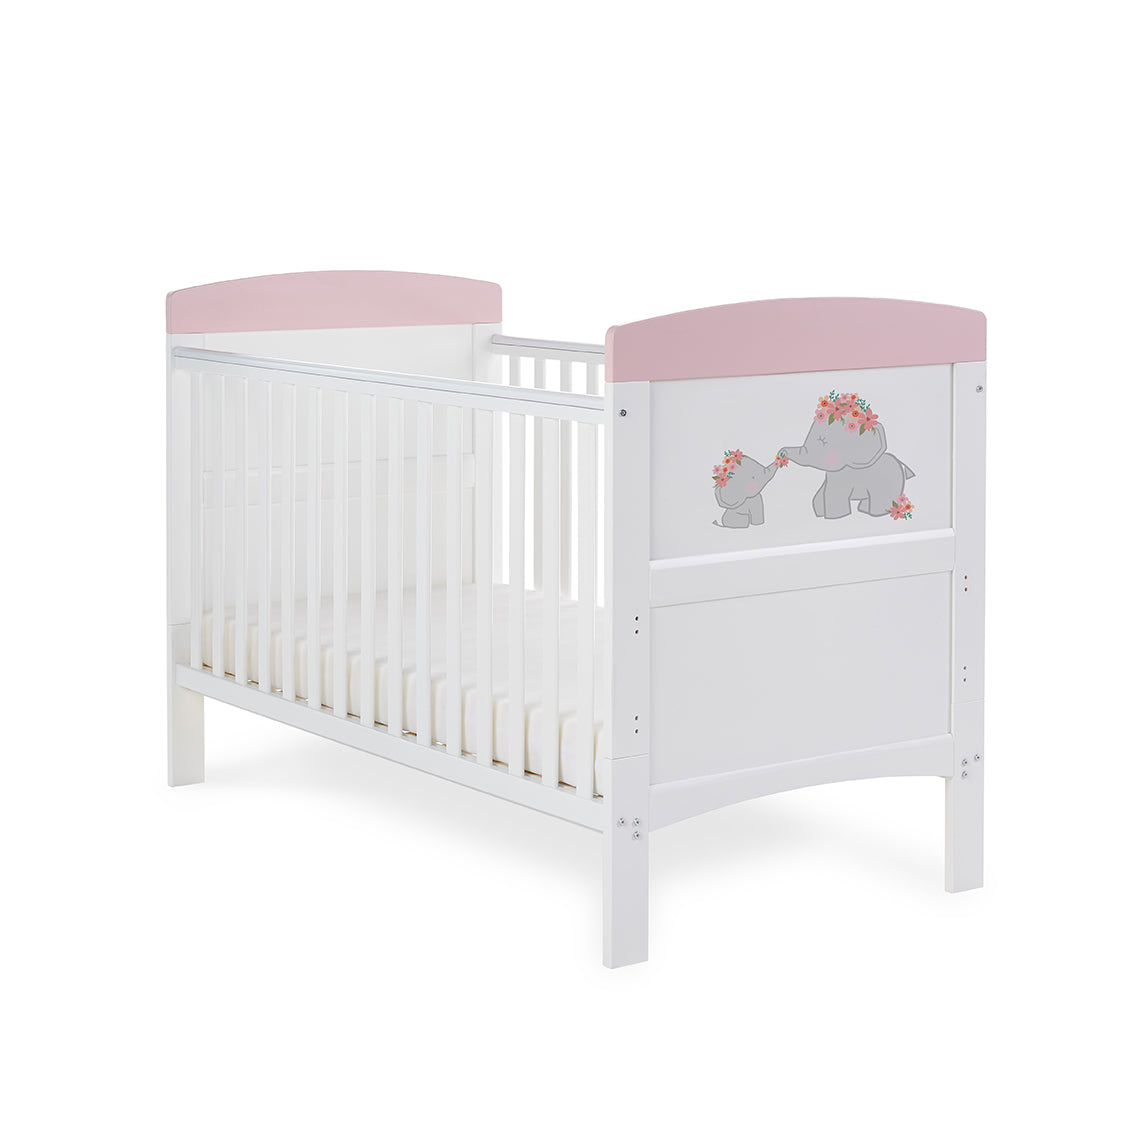 Obaby Grace Inspire Cot Bed – Me & Mini Me Elephants – Pink -  | For Your Little One